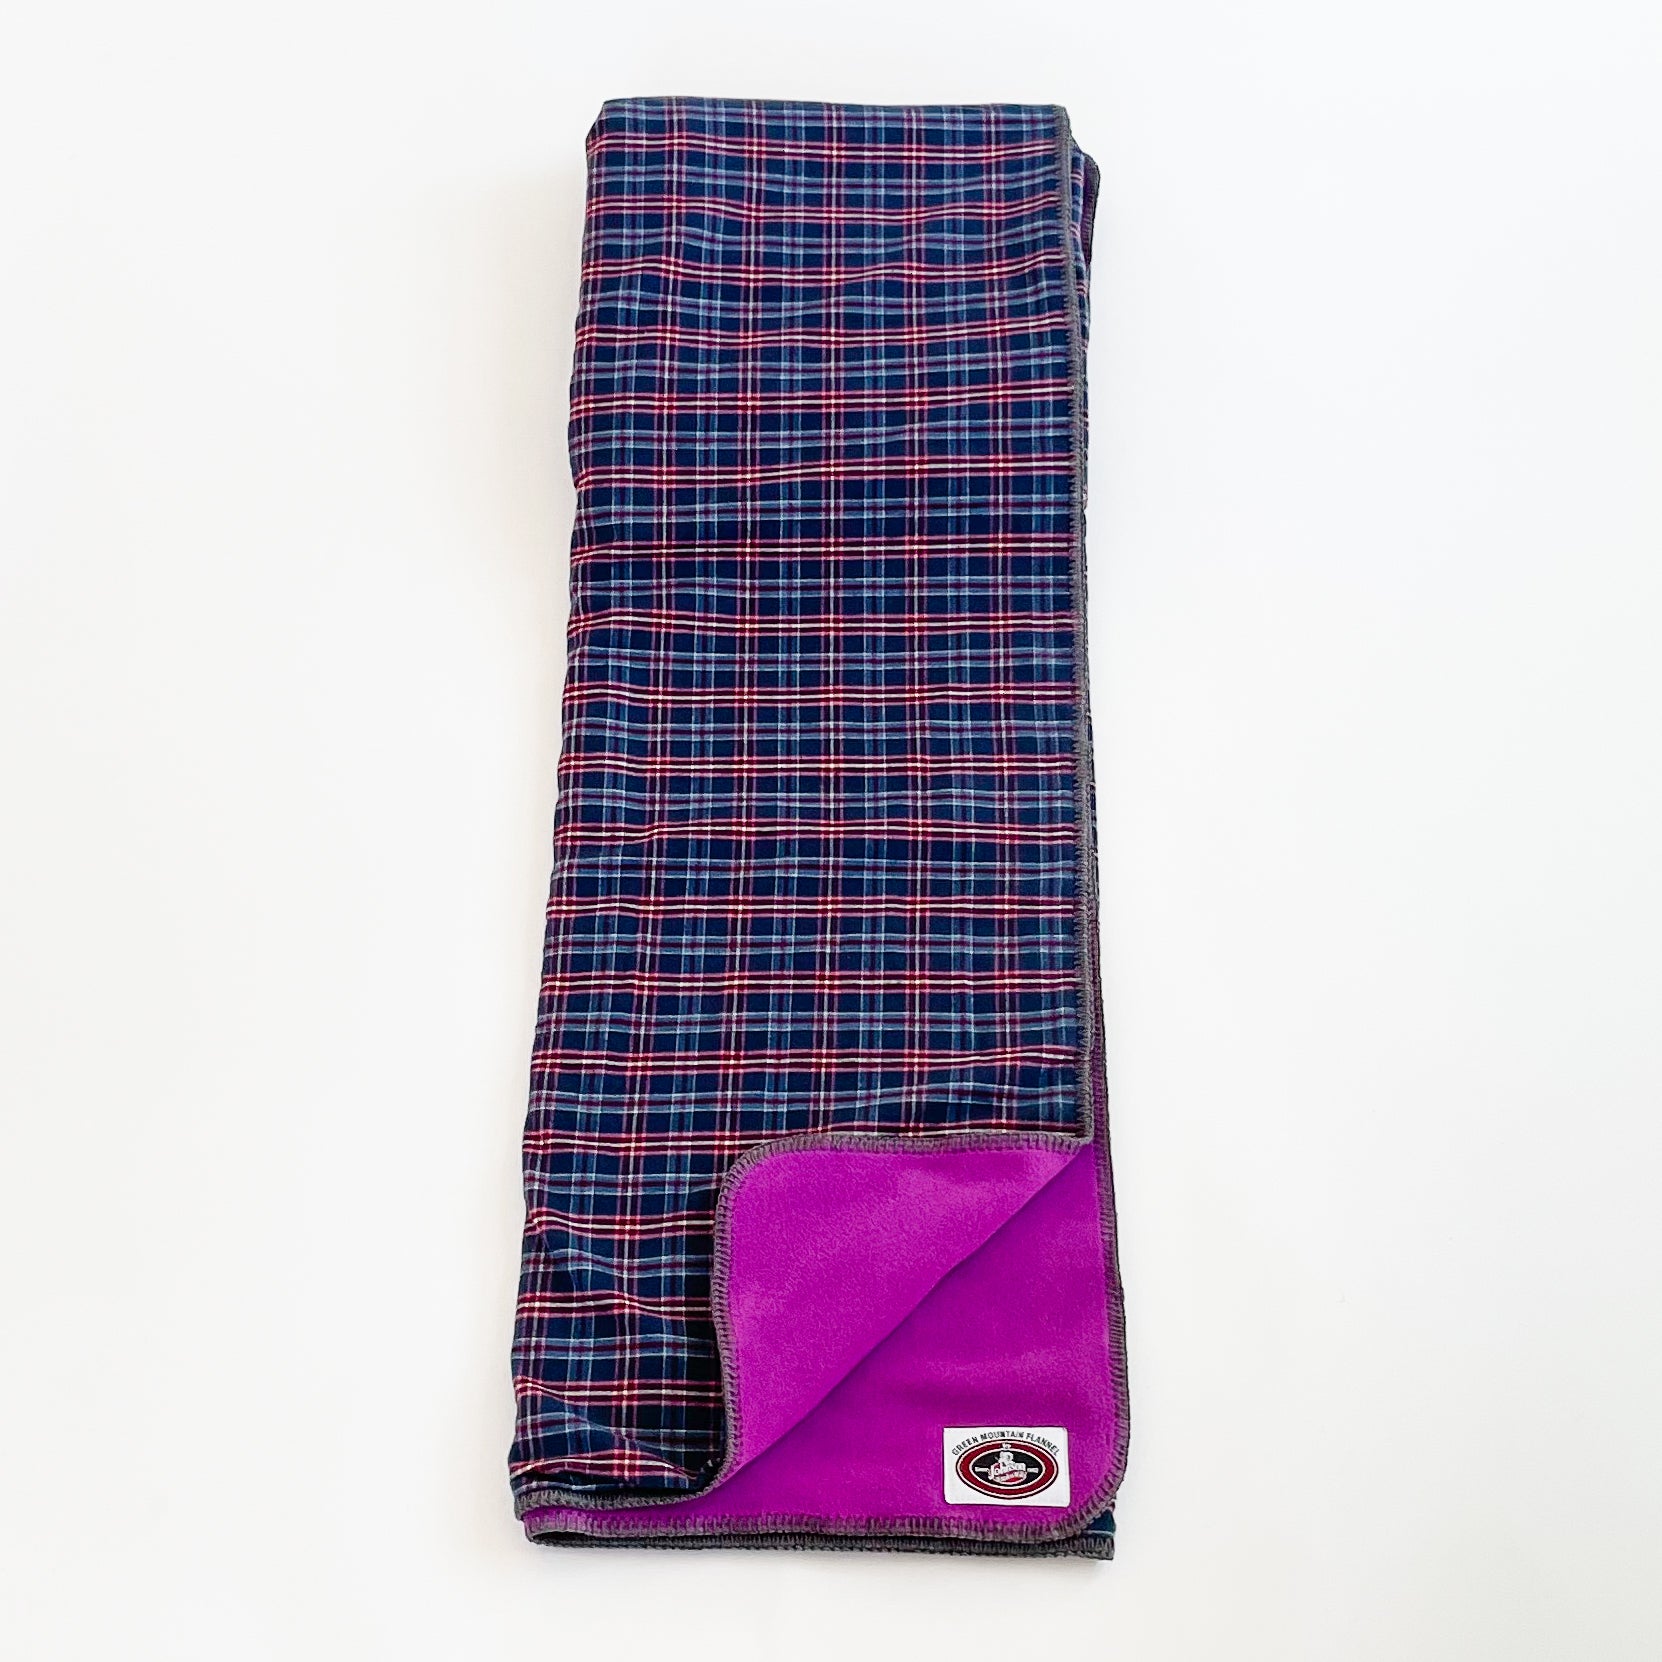 Green Mountain Flannel Throw Middleberry, blue/red/white stripes with purple fleece lining open corner view